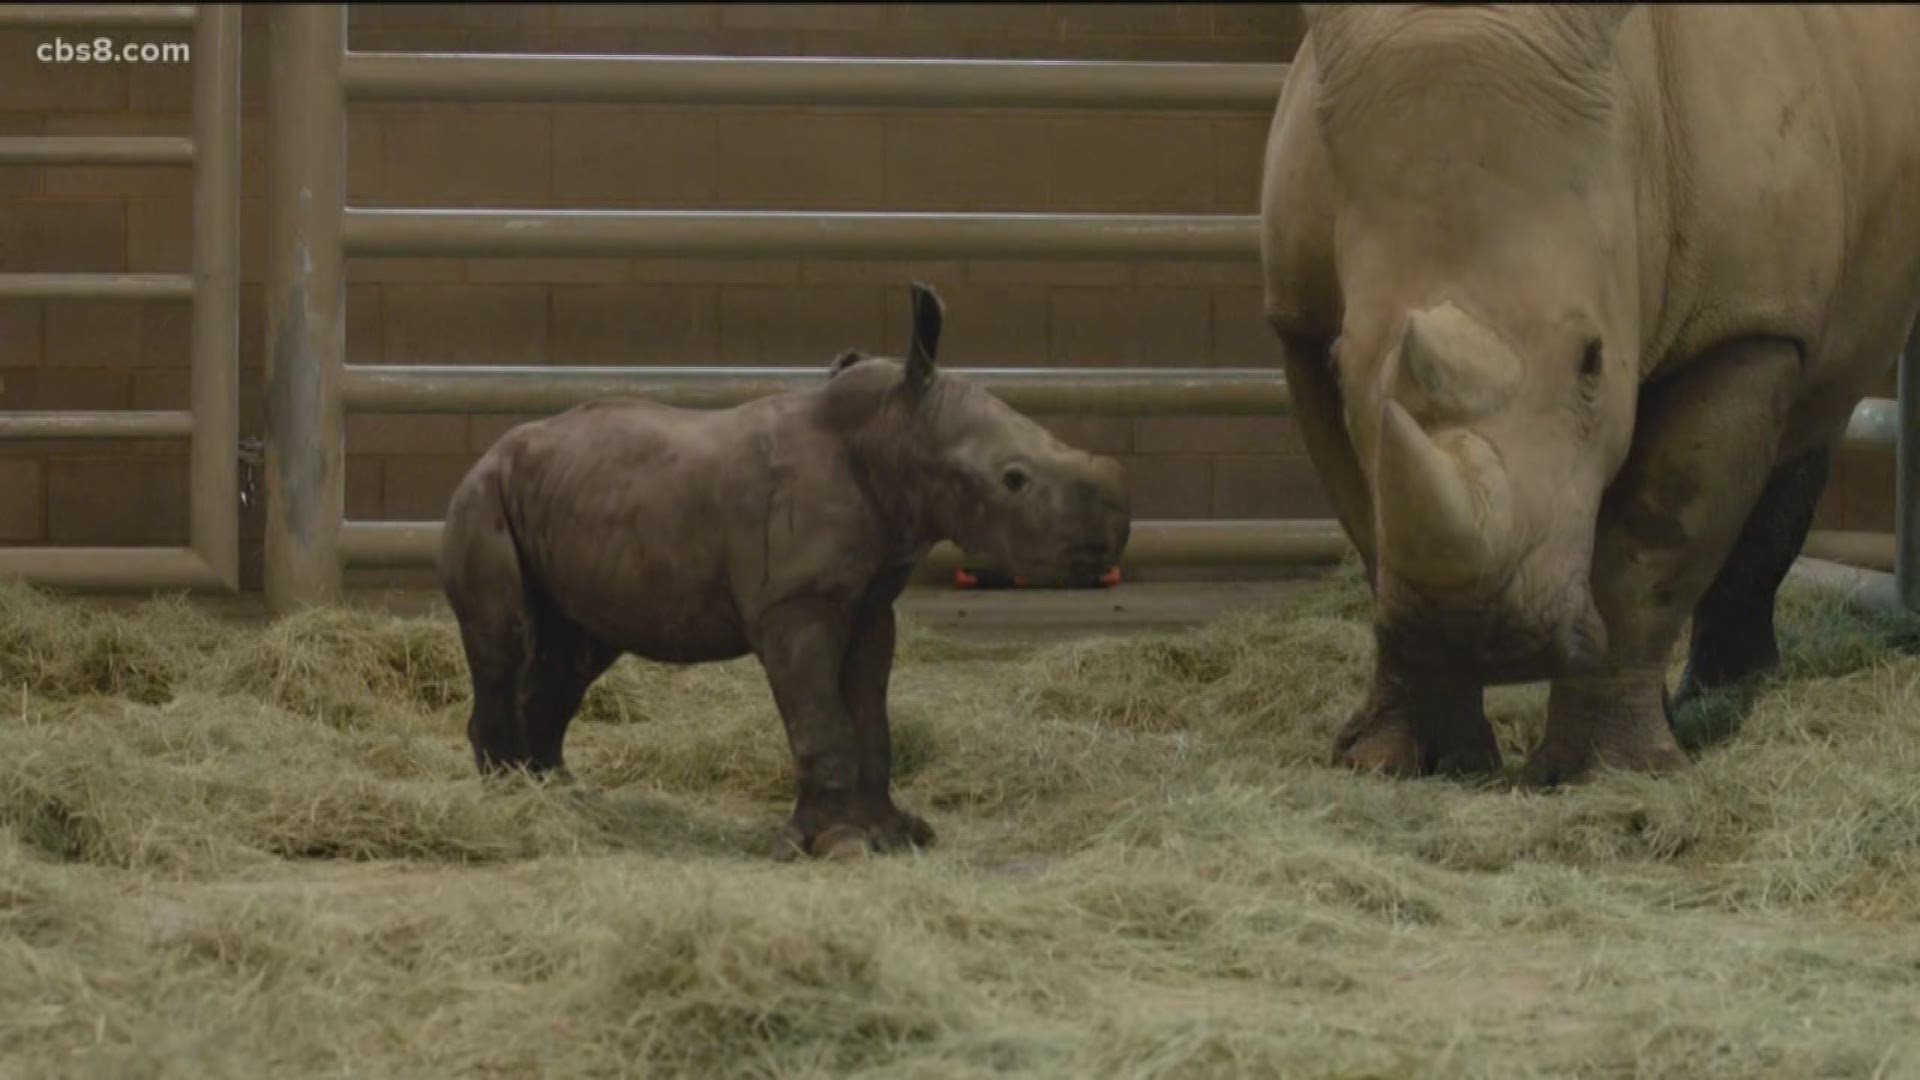 The first southern white rhino calf conceived through artificial insemination was born over the weekend at the San Diego Zoo Safari Park.